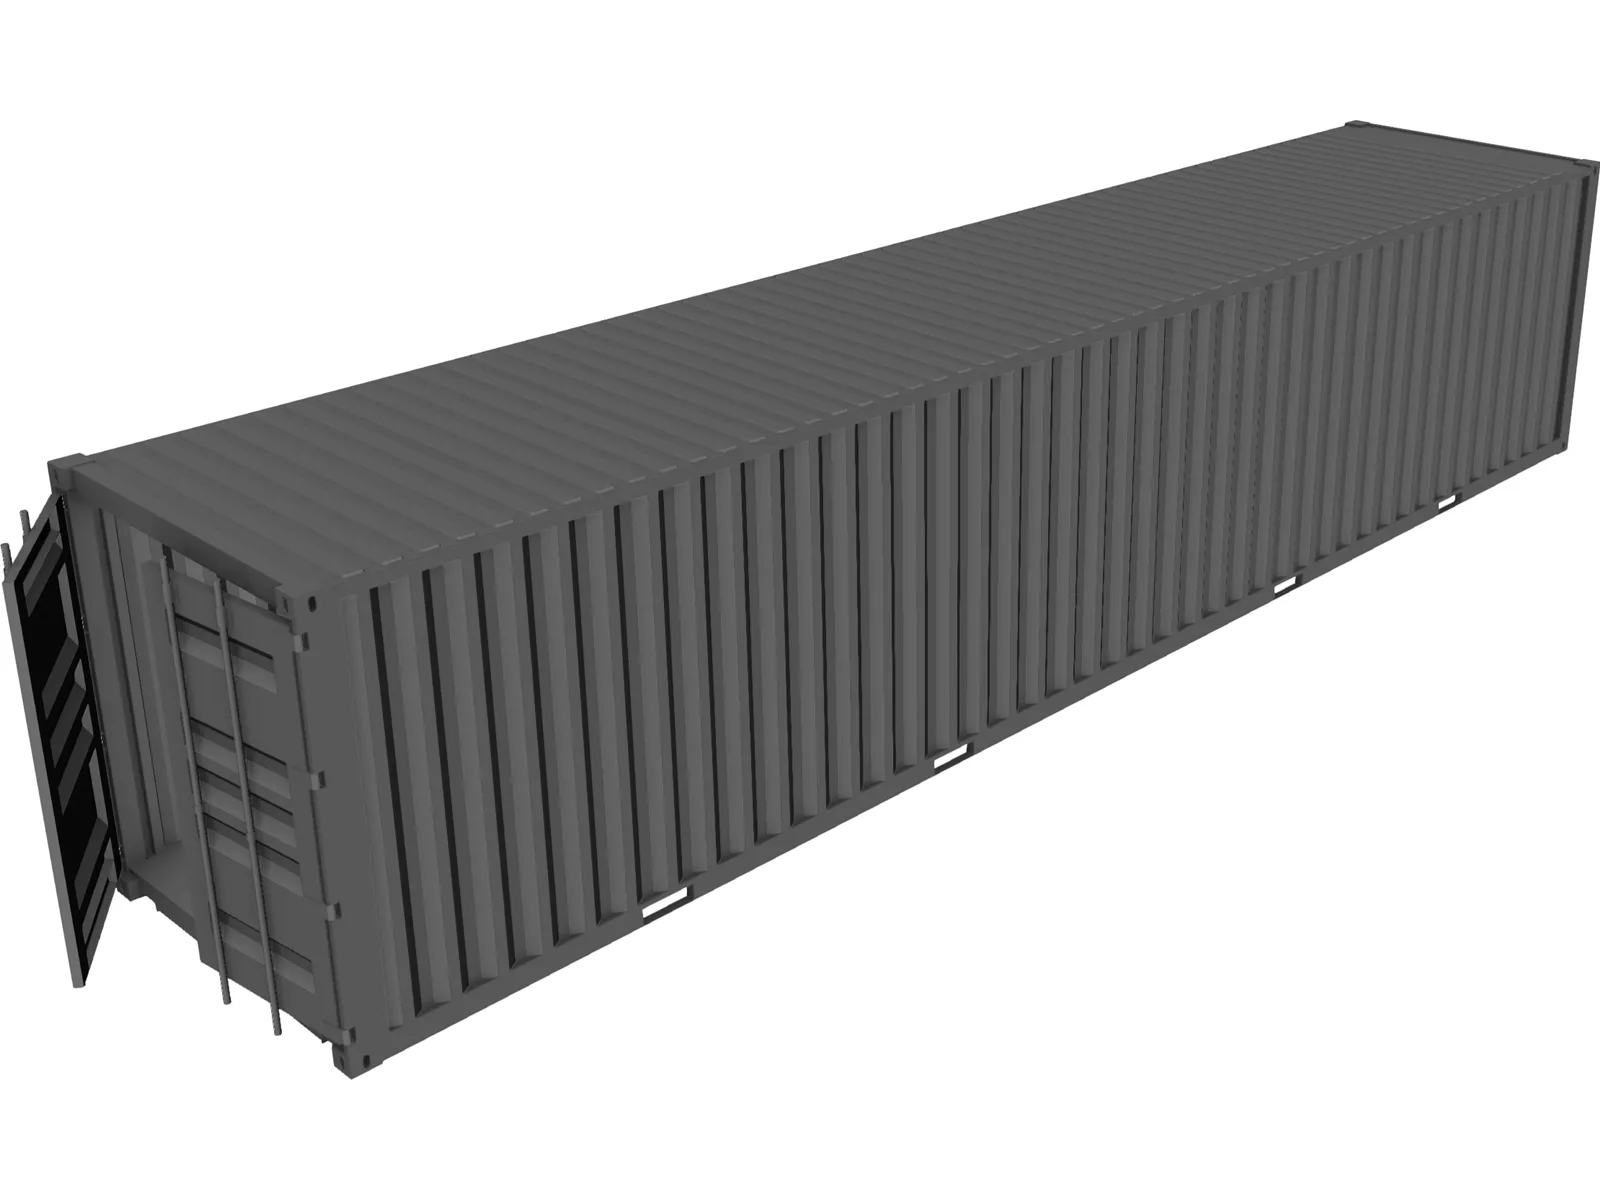 Shipping Container 40x08x08 3D Model